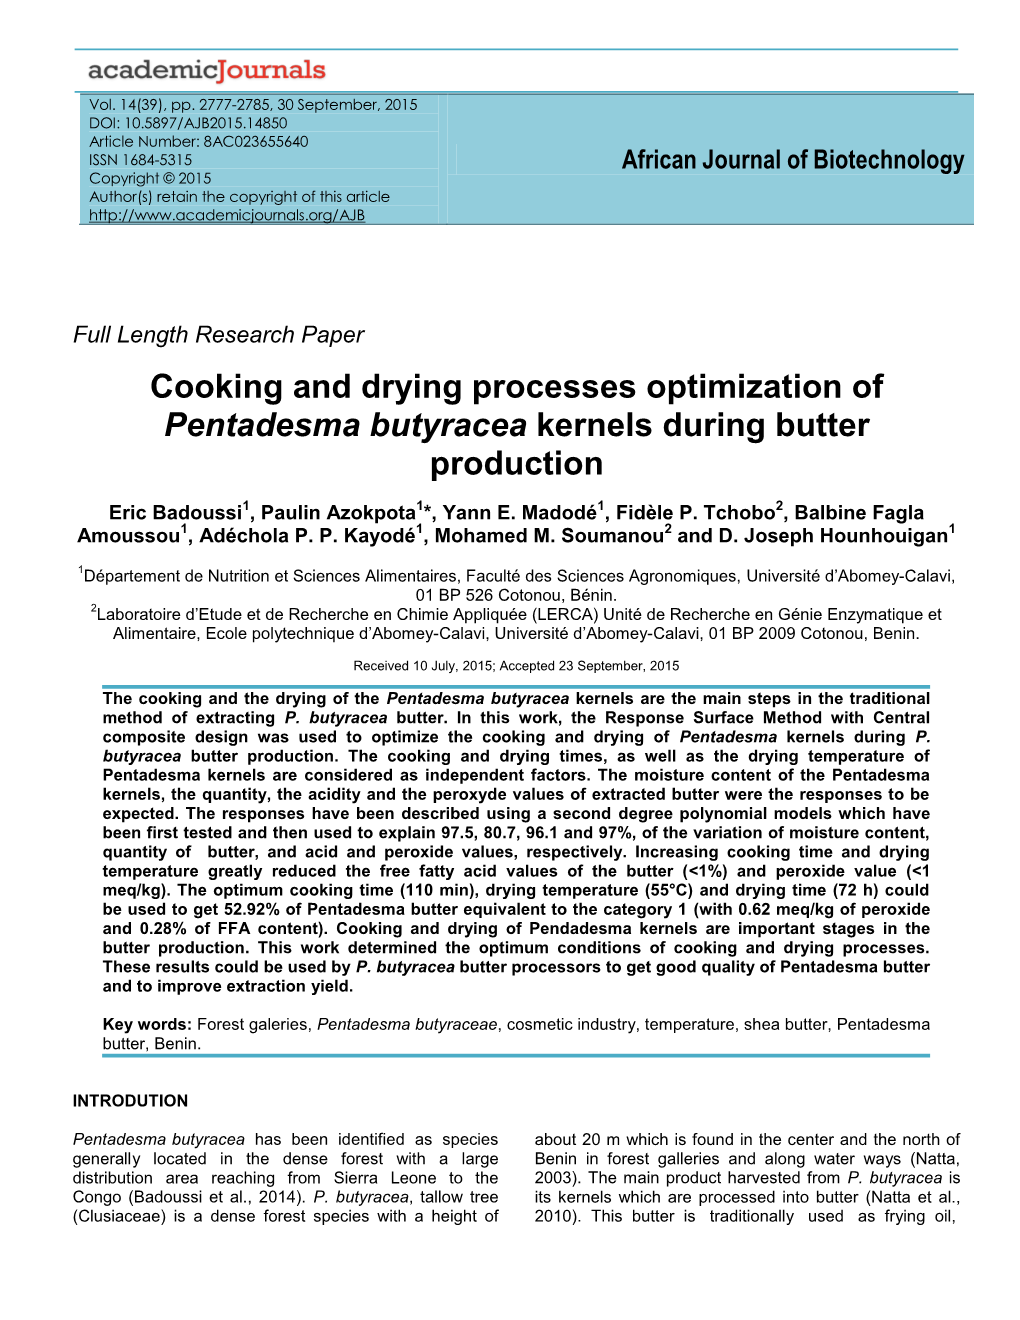 Cooking and Drying Processes Optimization of Pentadesma Butyracea Kernels During Butter Production